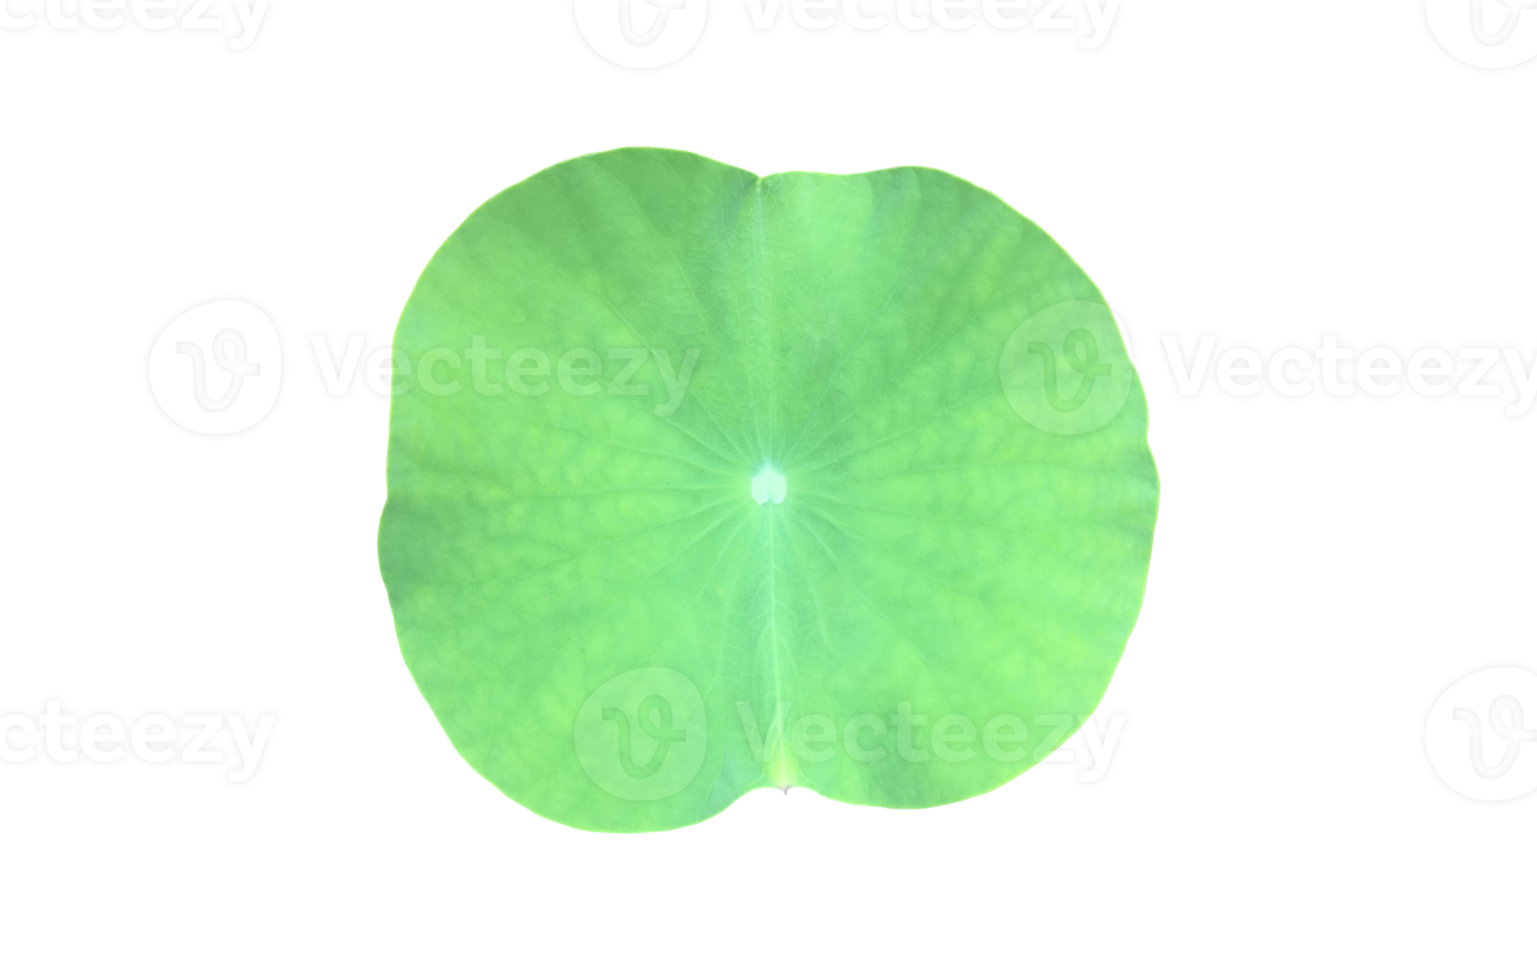 Isolated waterlily or lotus plants with clipping paths. png